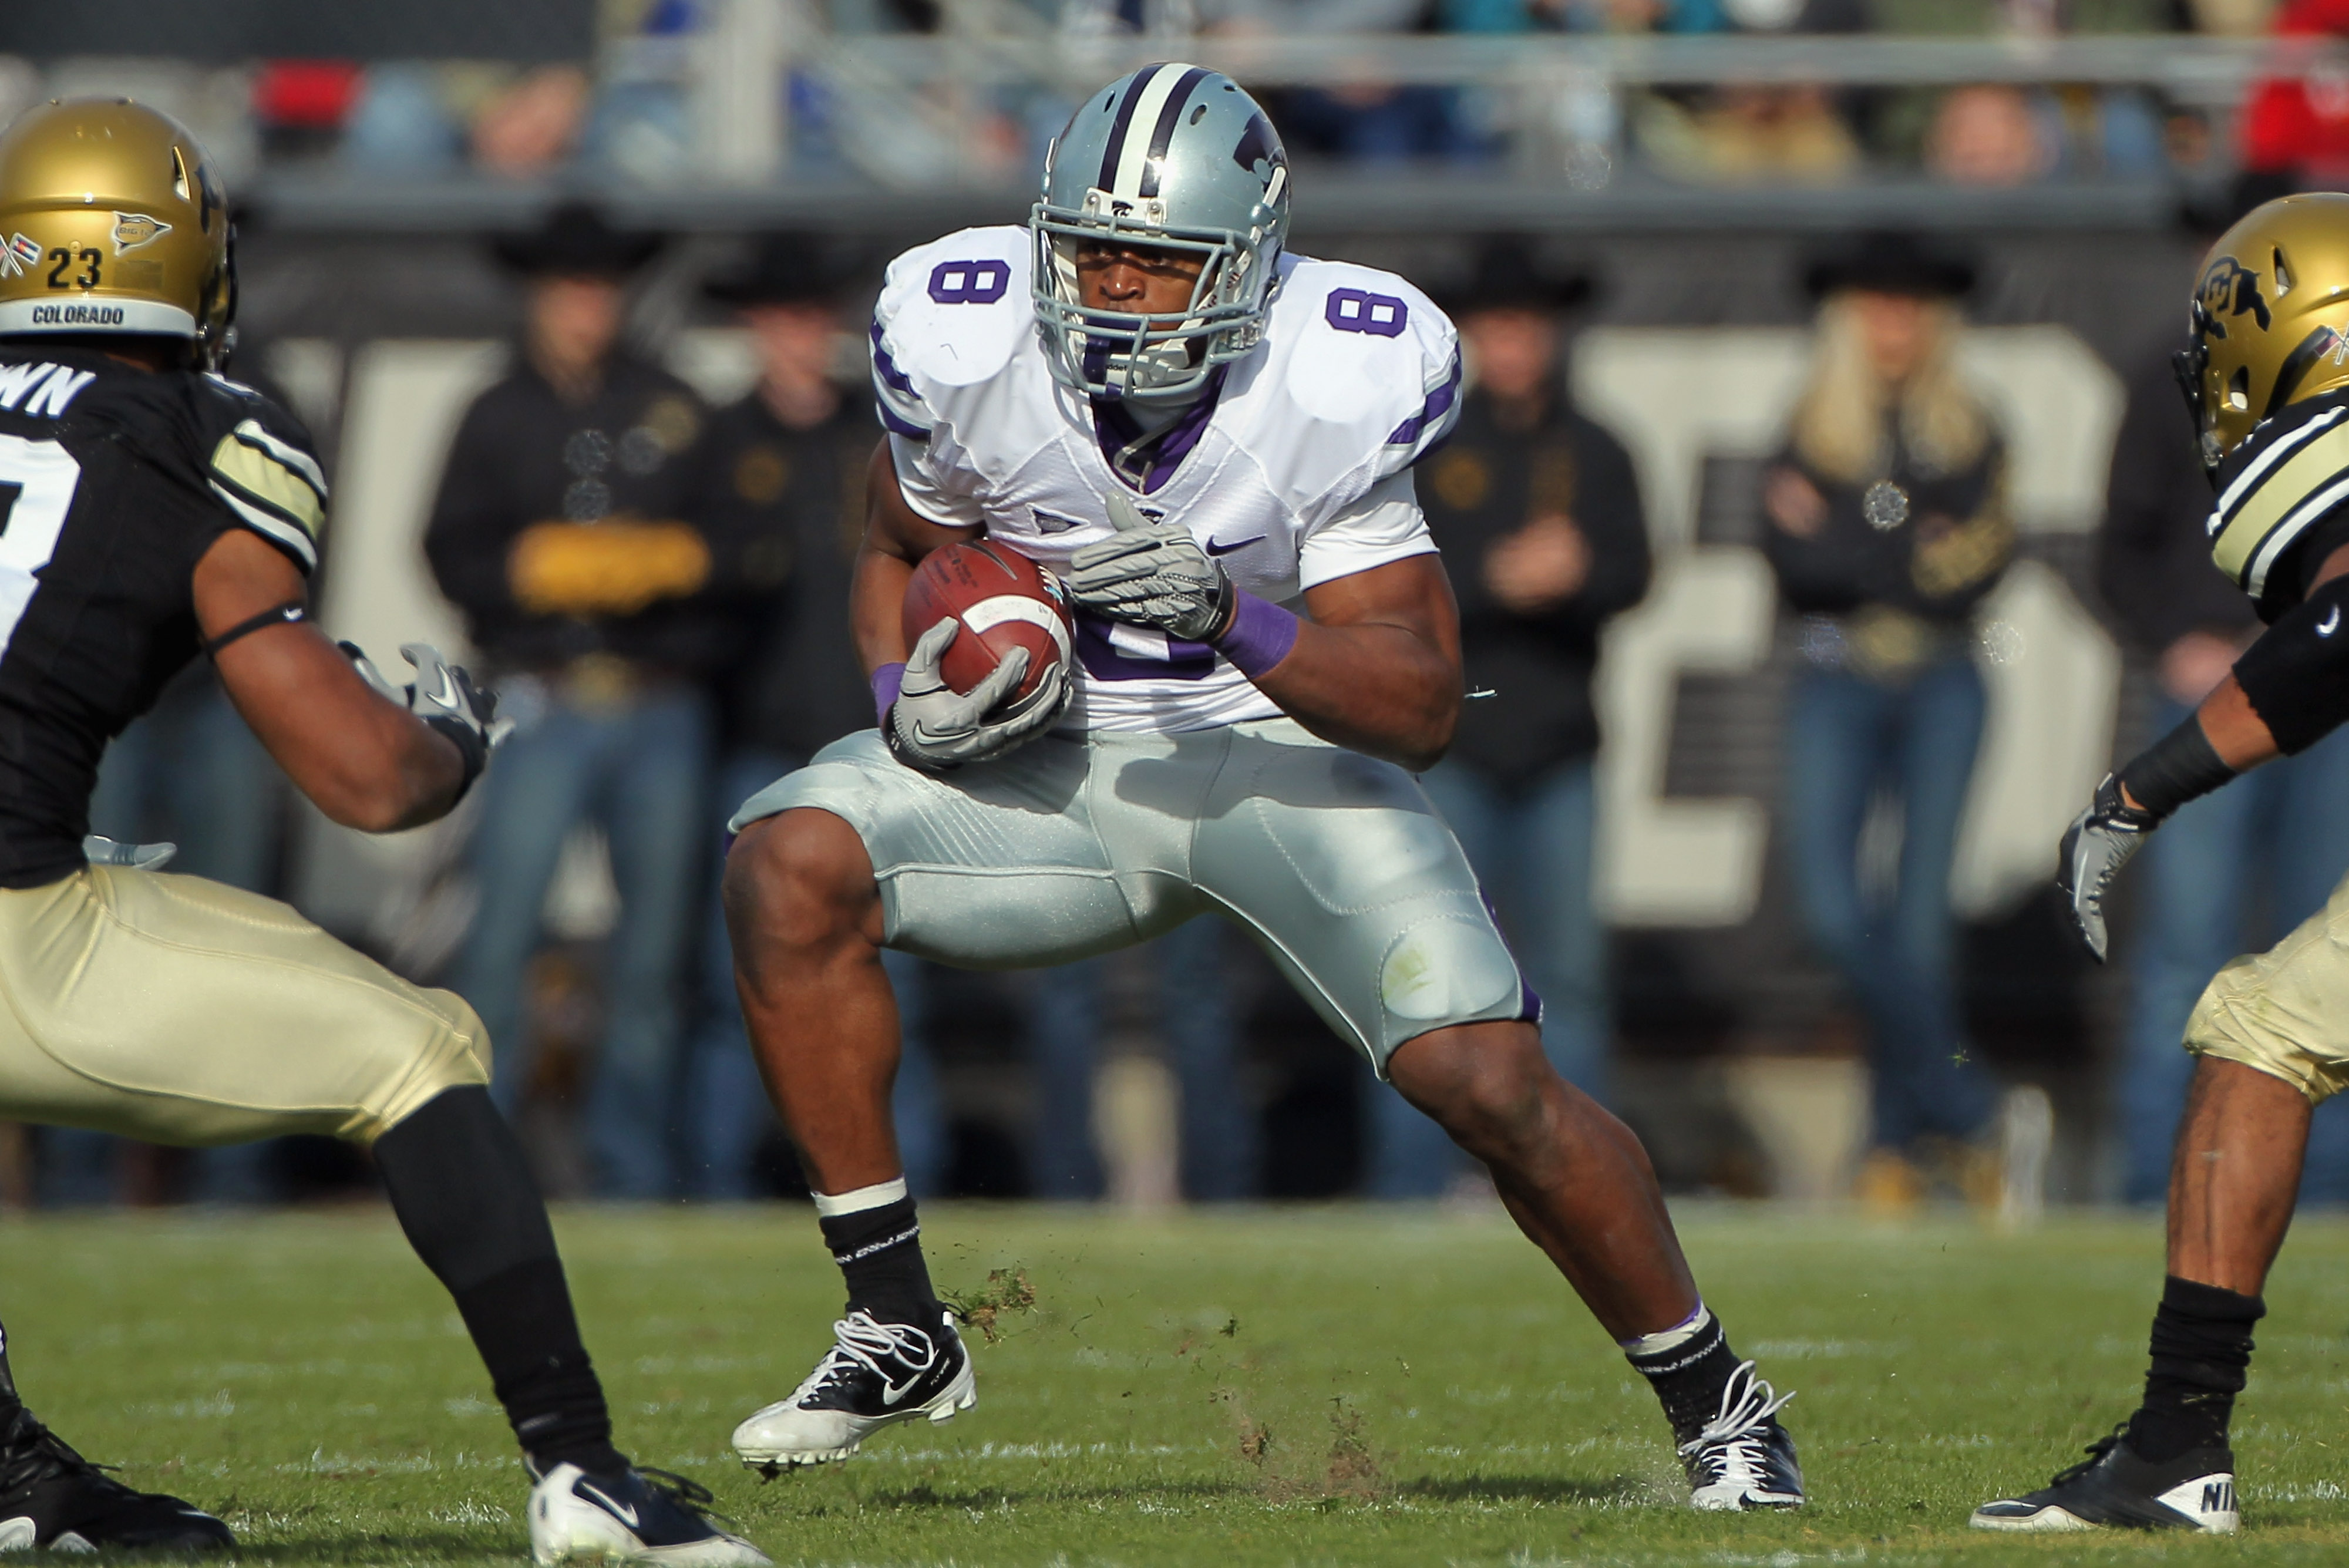 BOULDER, CO - NOVEMBER 20:  Daniel Thomas #8 of the Kansas State Wildcats rushes with the ball against the Colorado Buffaloes at Folsom Field on November 20, 2010 in Boulder, Colorado. Colorado defeated Kansas State 44-36.  (Photo by Doug Pensinger/Getty